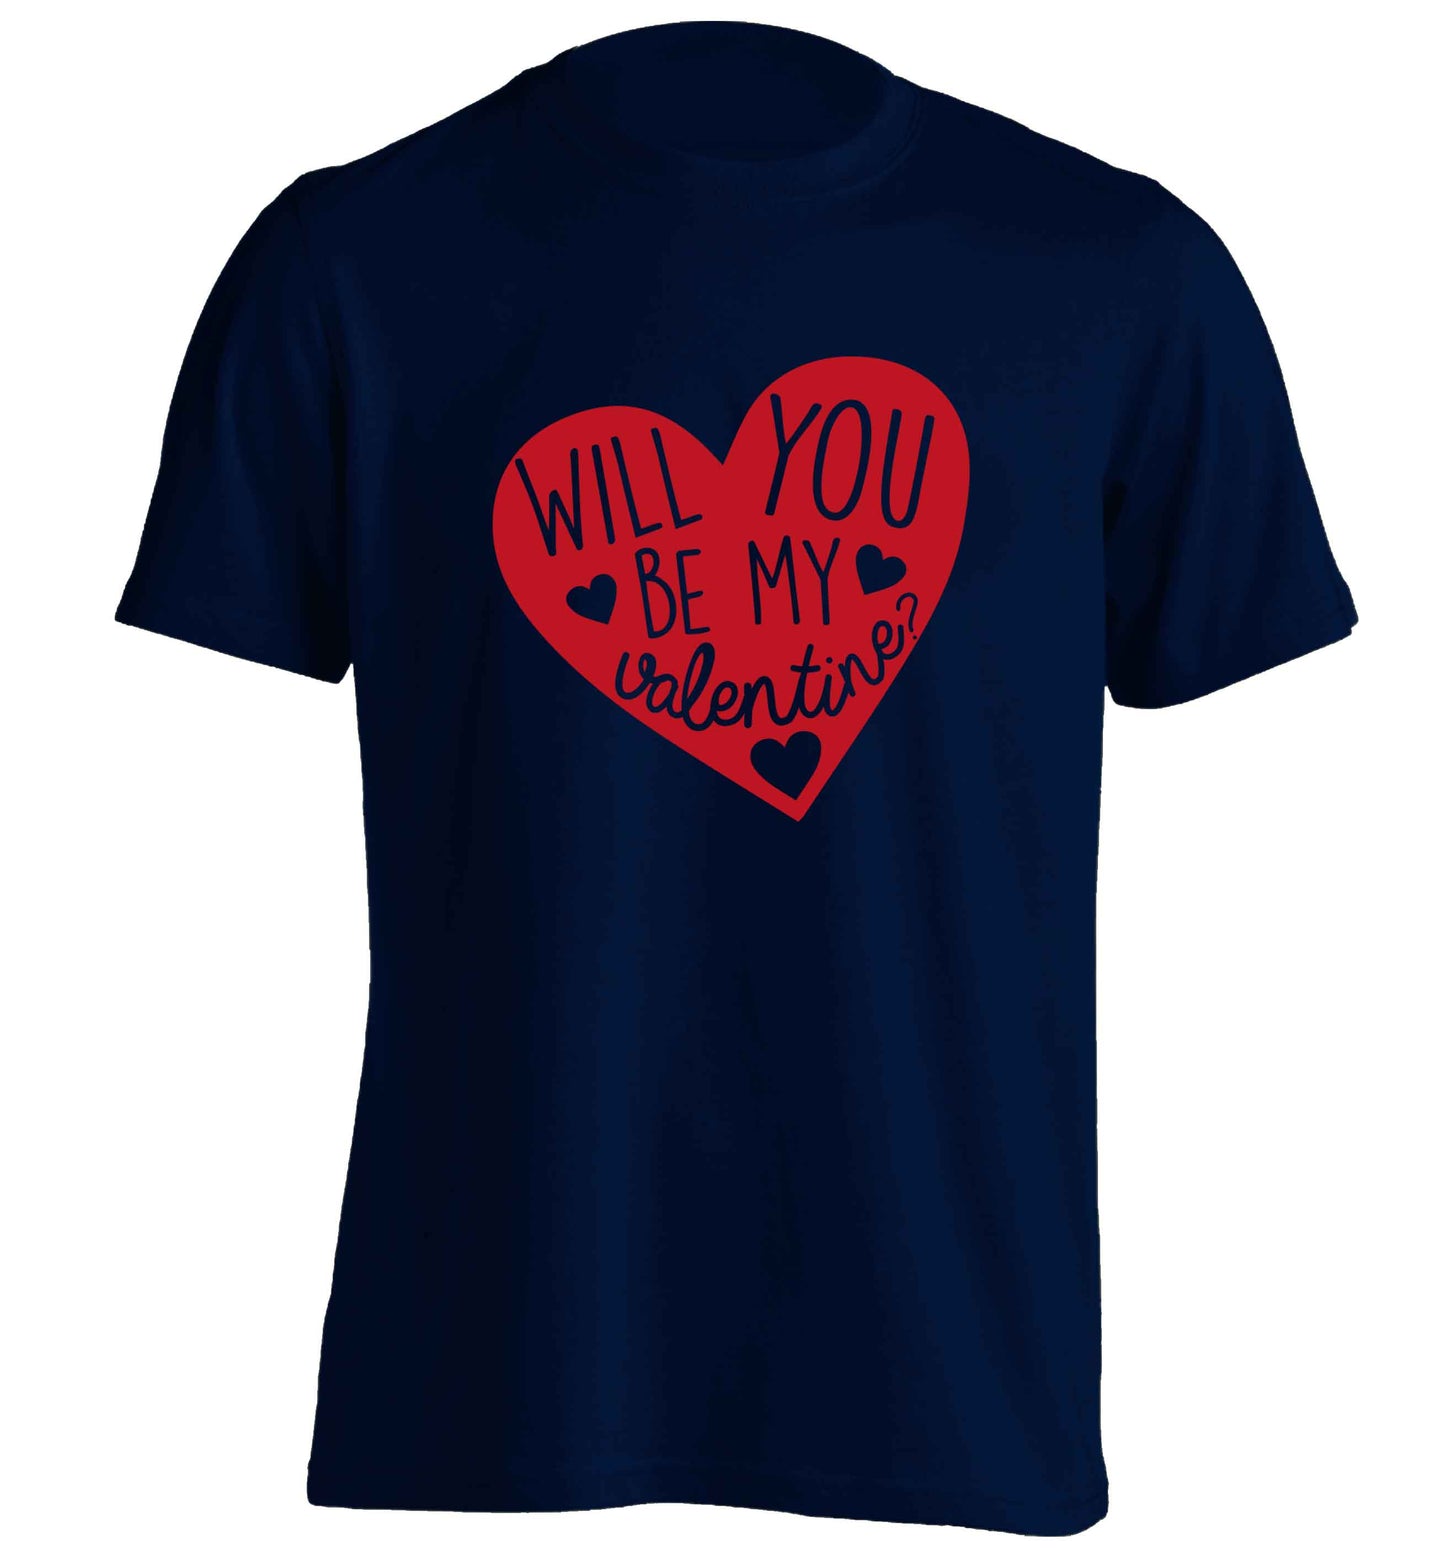 Will you be my valentine? adults unisex navy Tshirt 2XL